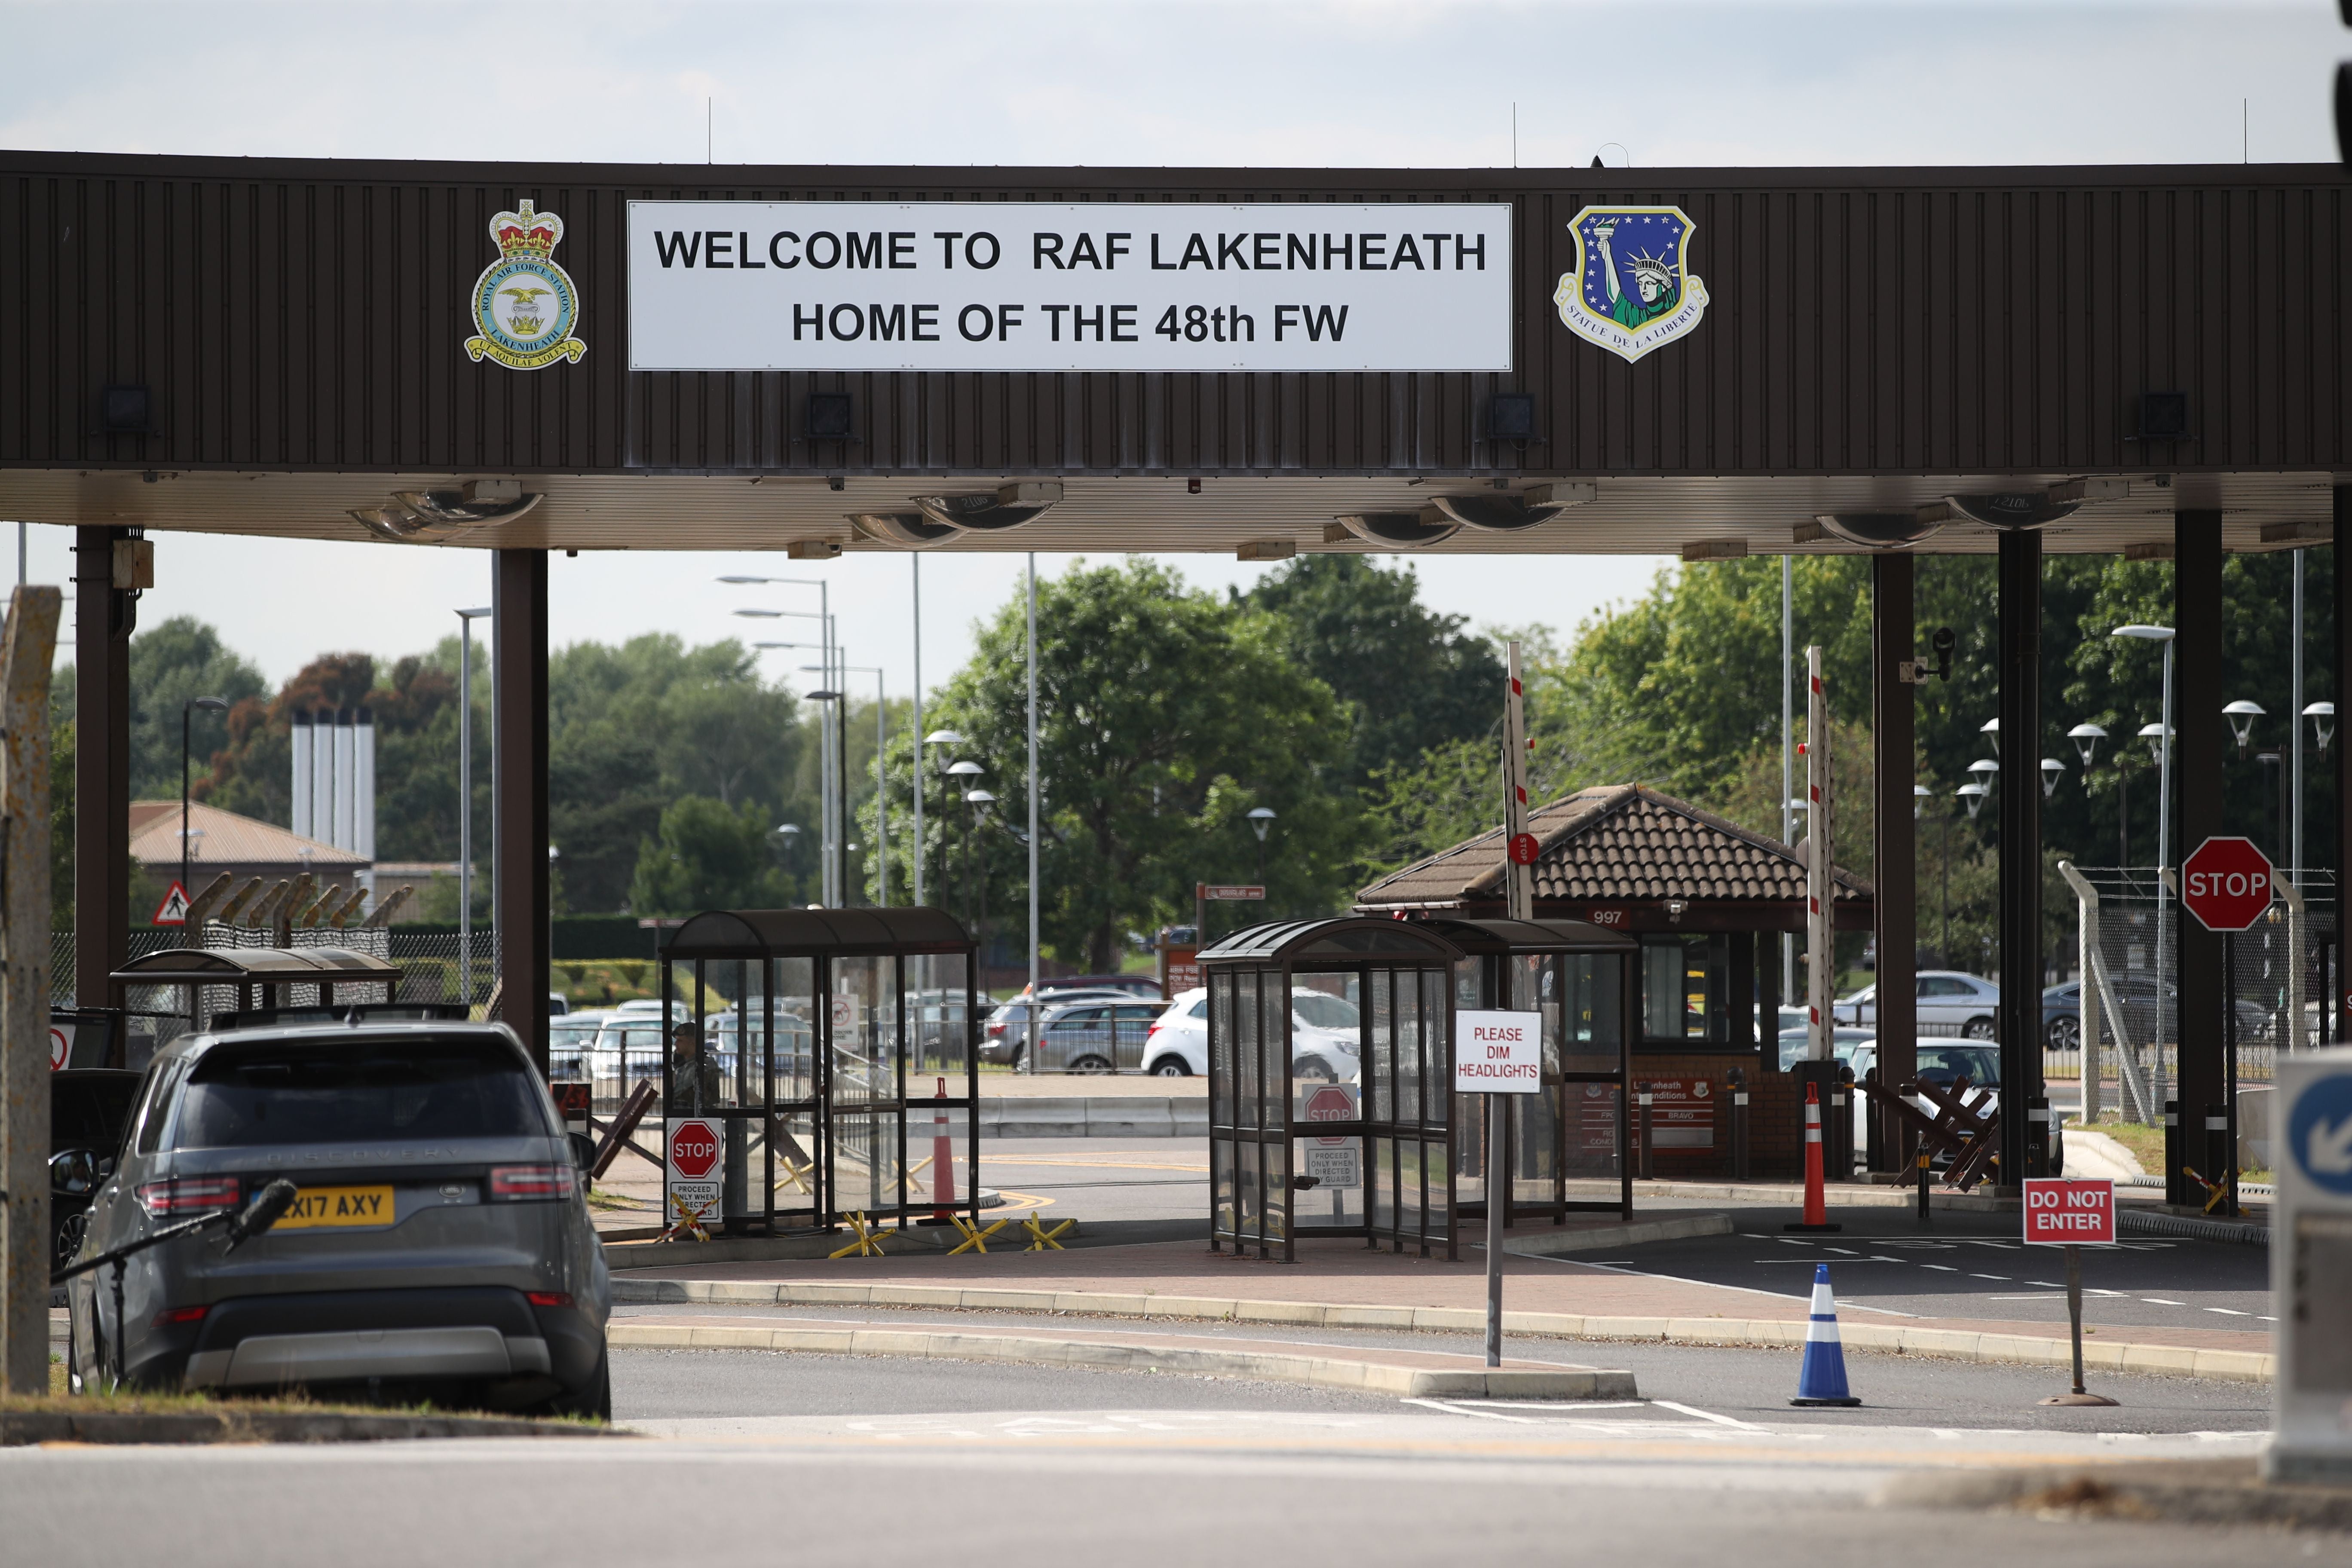 RAF Lakenheath, home of the US Air Force’s 48th Fighter Wing, near Cambridge